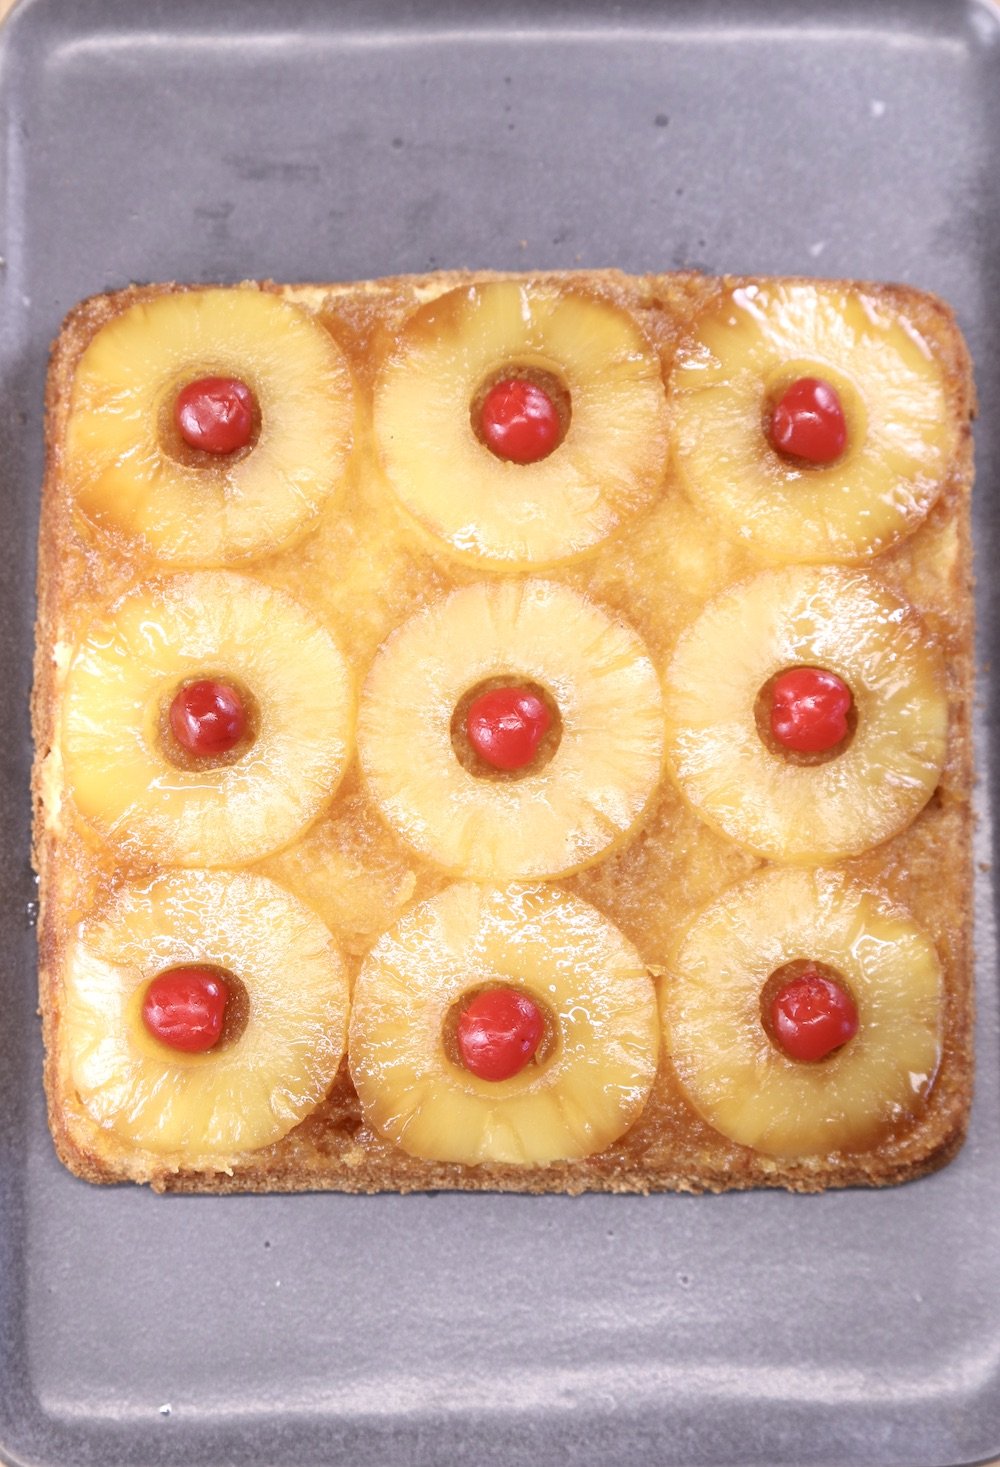 Pineapple Upside Down Cake - square with pineapple rings and cherries in the center